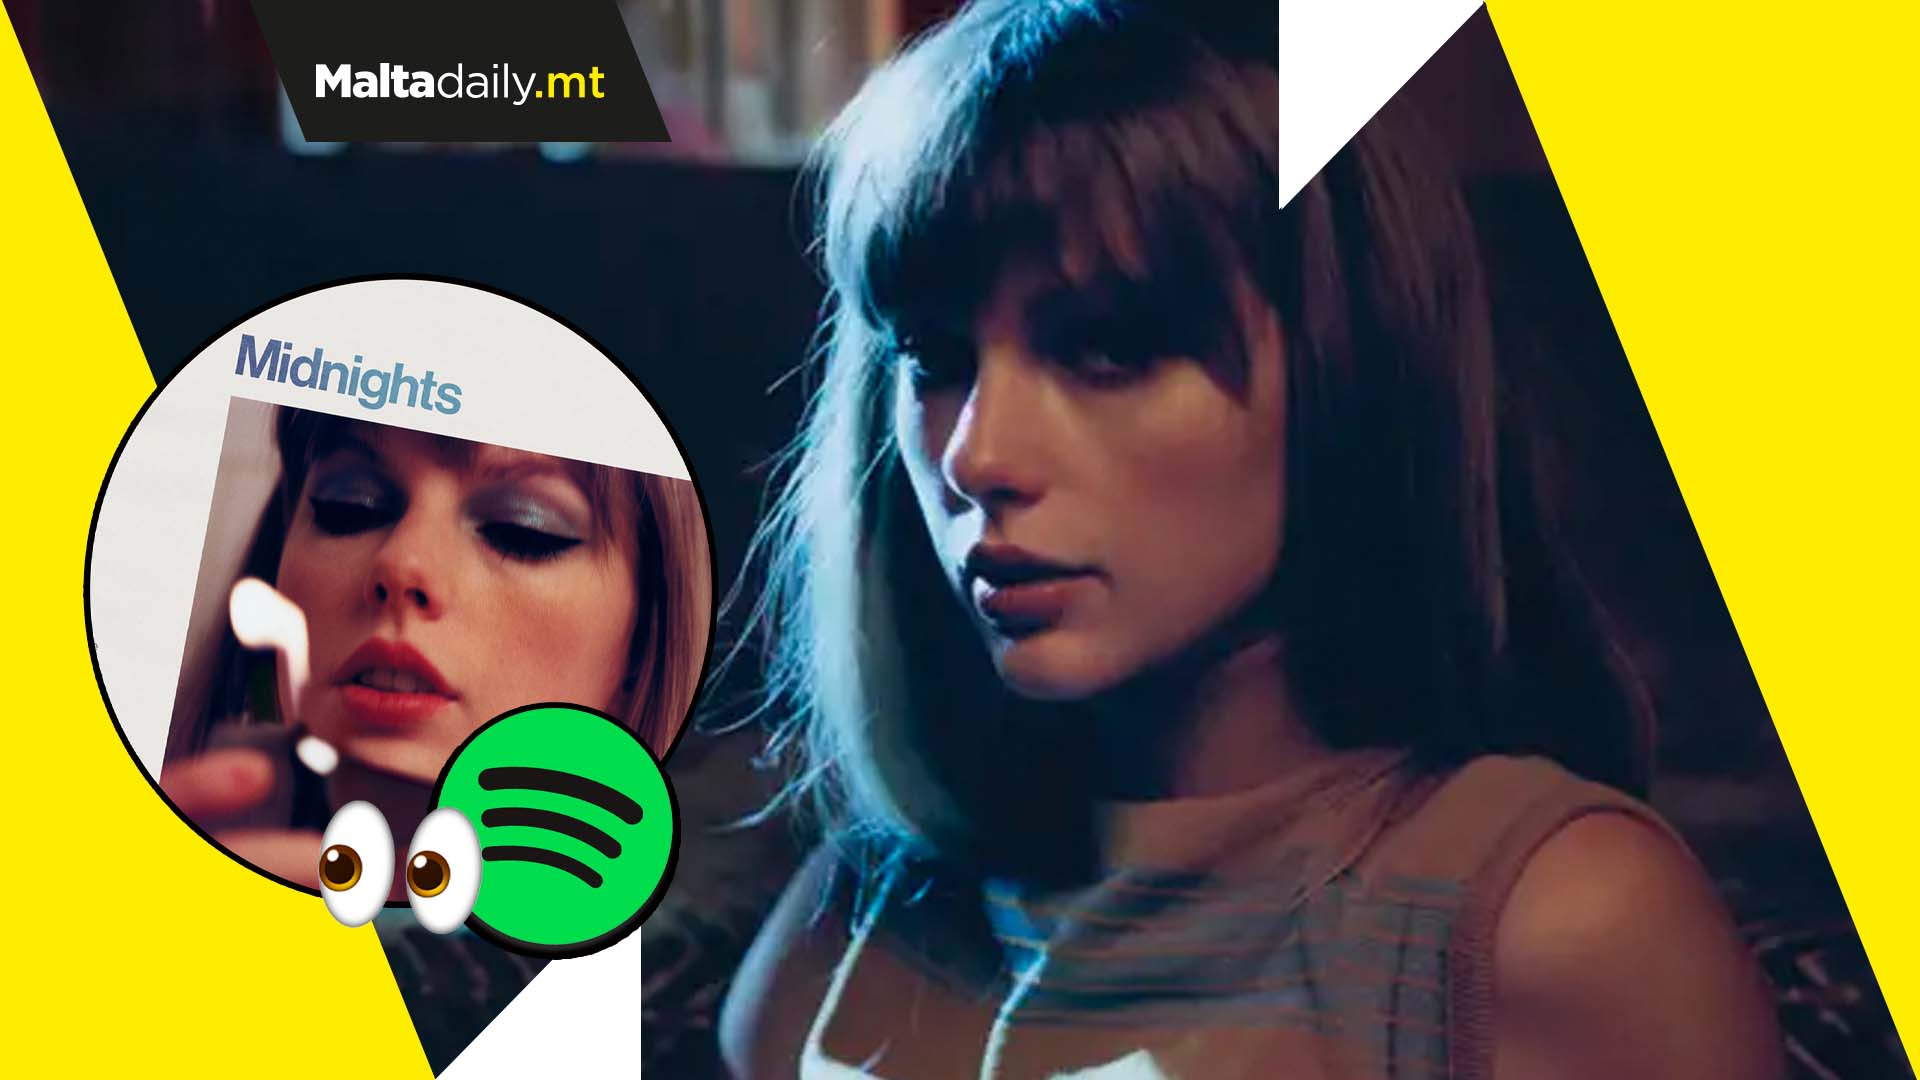 Taylor Swift’s 'Midnights' becomes Spotify’s most streamed album in just 1 day